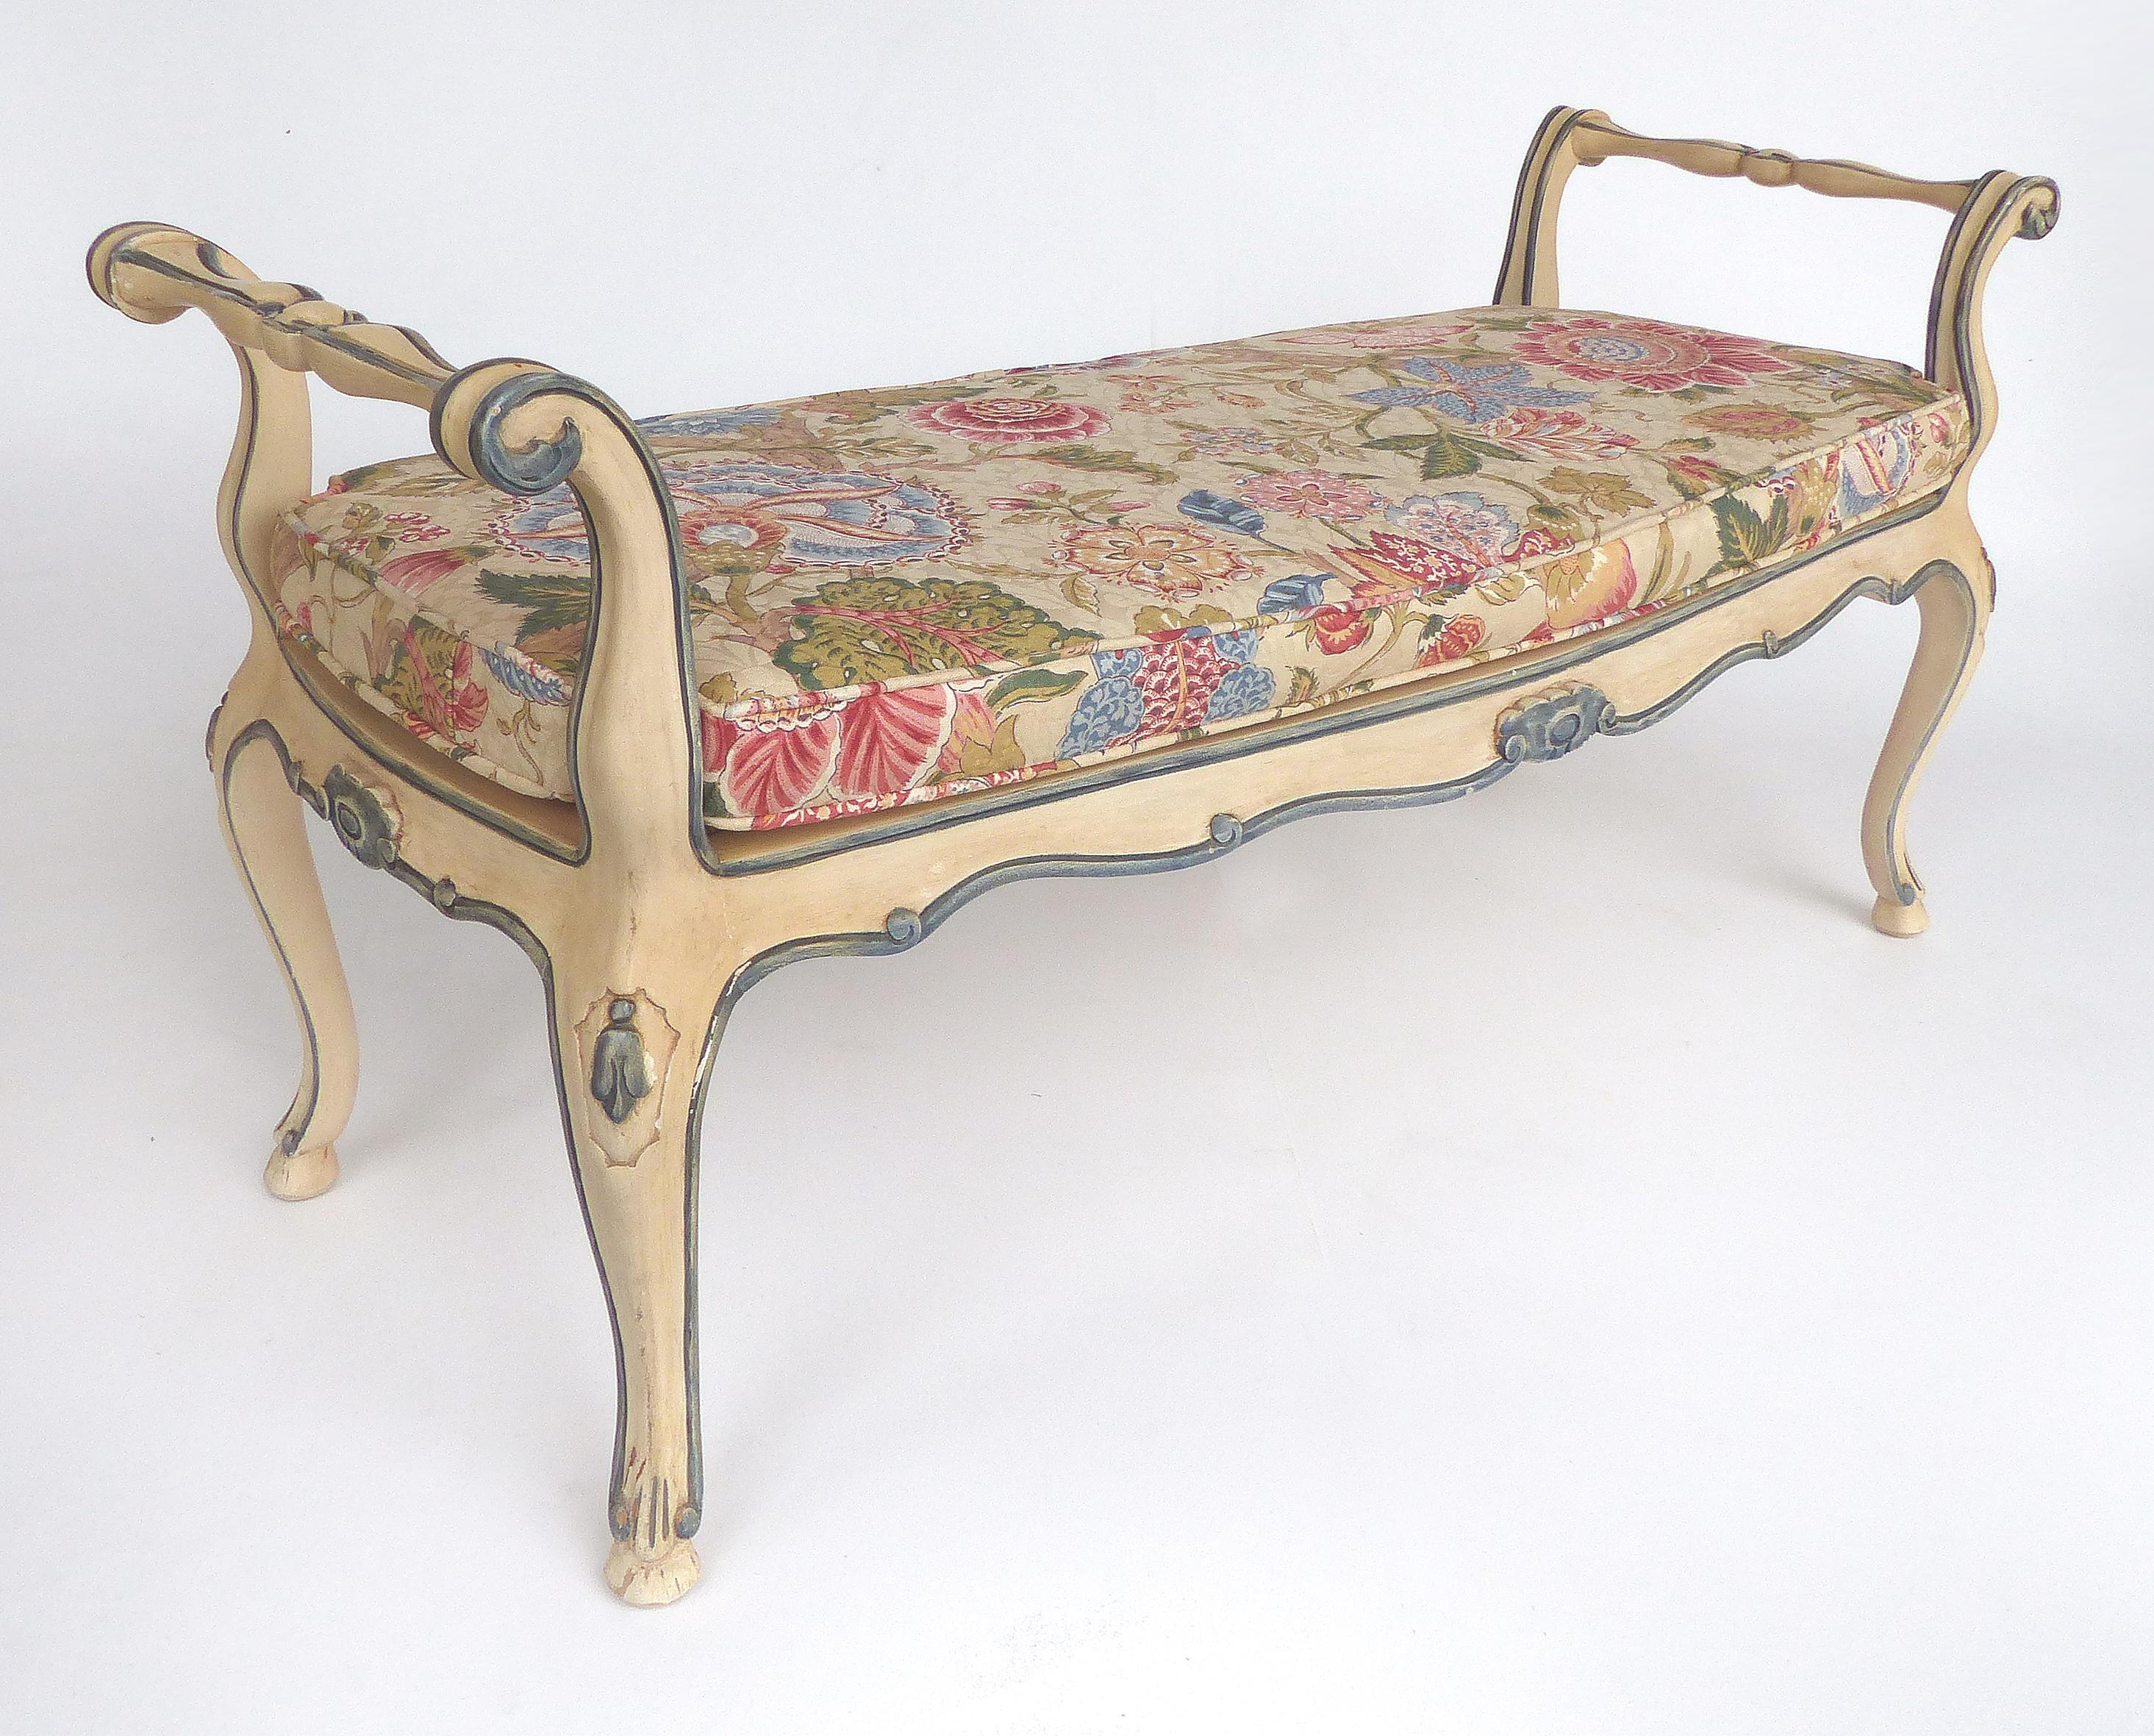 John Widdicomb Hand Painted Louis XV Style Caned Bench with Cushion

Offered for sale is a Louis XV style bench from a bedroom suite by John Widdicomb of Grand Rapids, MI, This hand painted bench has a caned seat that supports a loose fitted seat